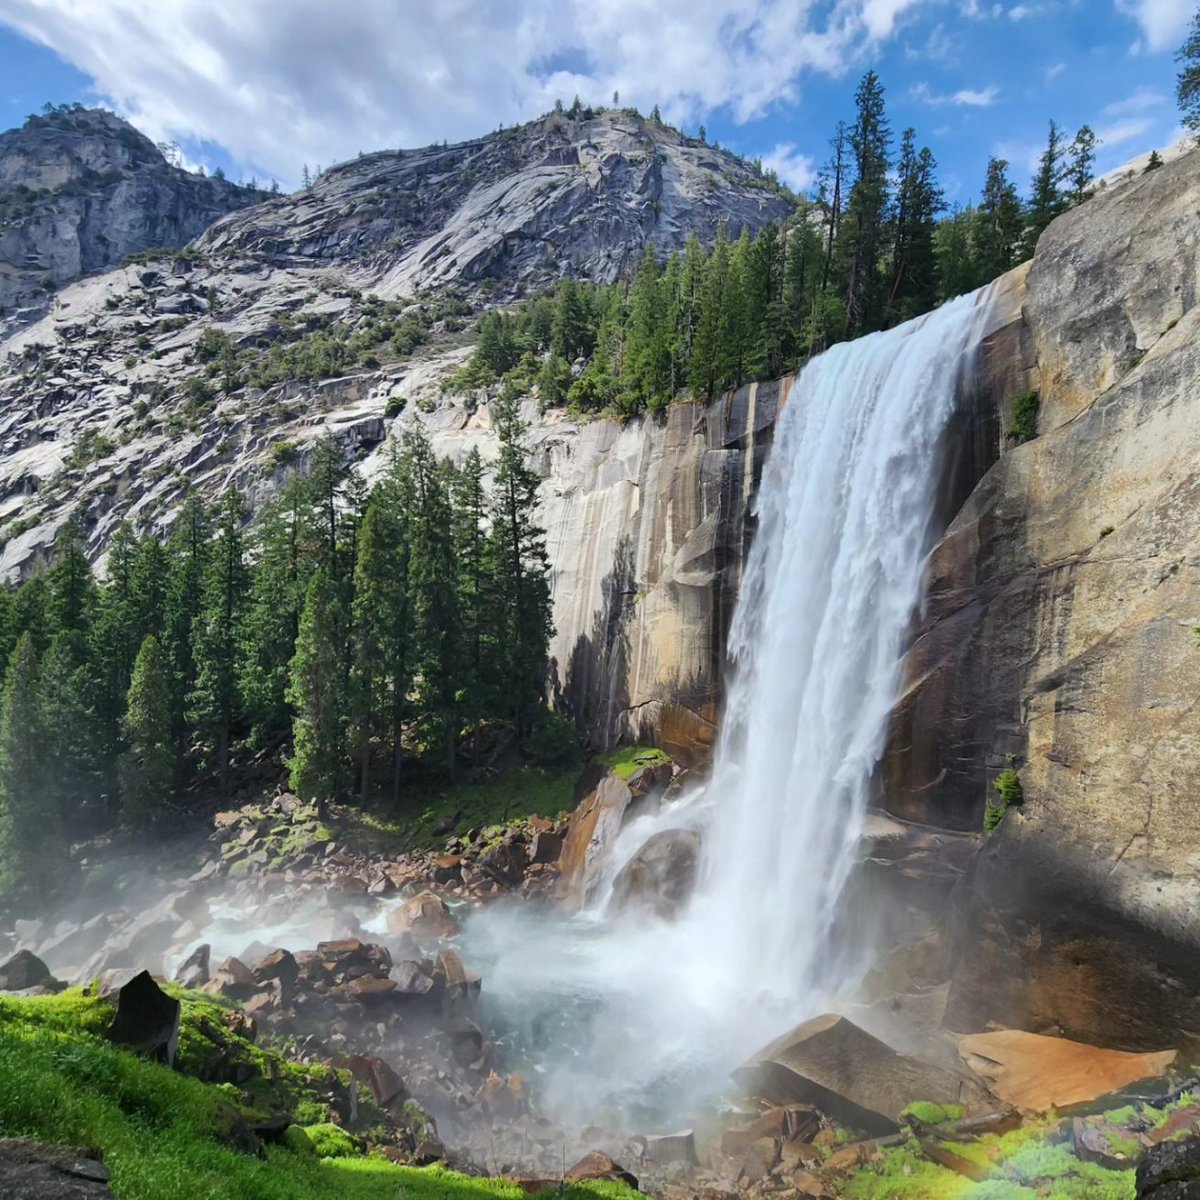 Kai and I will be heading to #Yosemite in a couple of weeks.  Can't wait to be back in it's beauty. #VernalFalls

#Keeponmoving #onefootinfrontoftheother #findyourhappyplace #geocaching #hiking #nature #heavenonearth #enjoyinglife #mountains #mothernaturesbeauty #naturetherapy